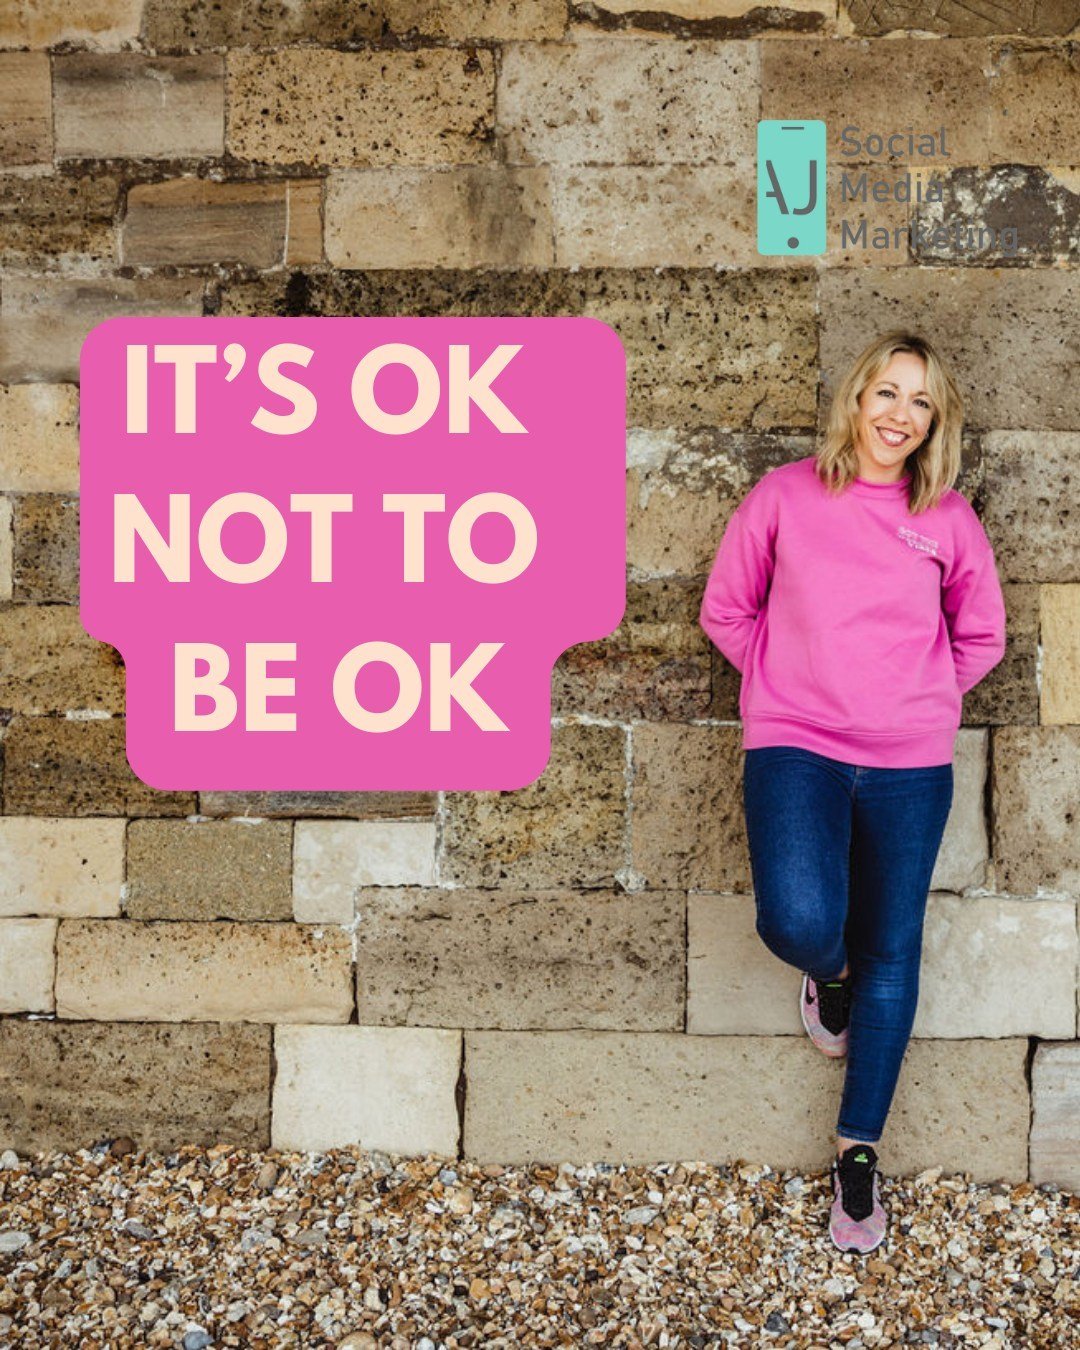 It's ok not to be ok. 

It's no secret I've struggled with my mental health over the years and I wanted to share how I cope and the wonderful people who help me stay on track and in focus.

Forever grateful to my family, friends and work colleagues f